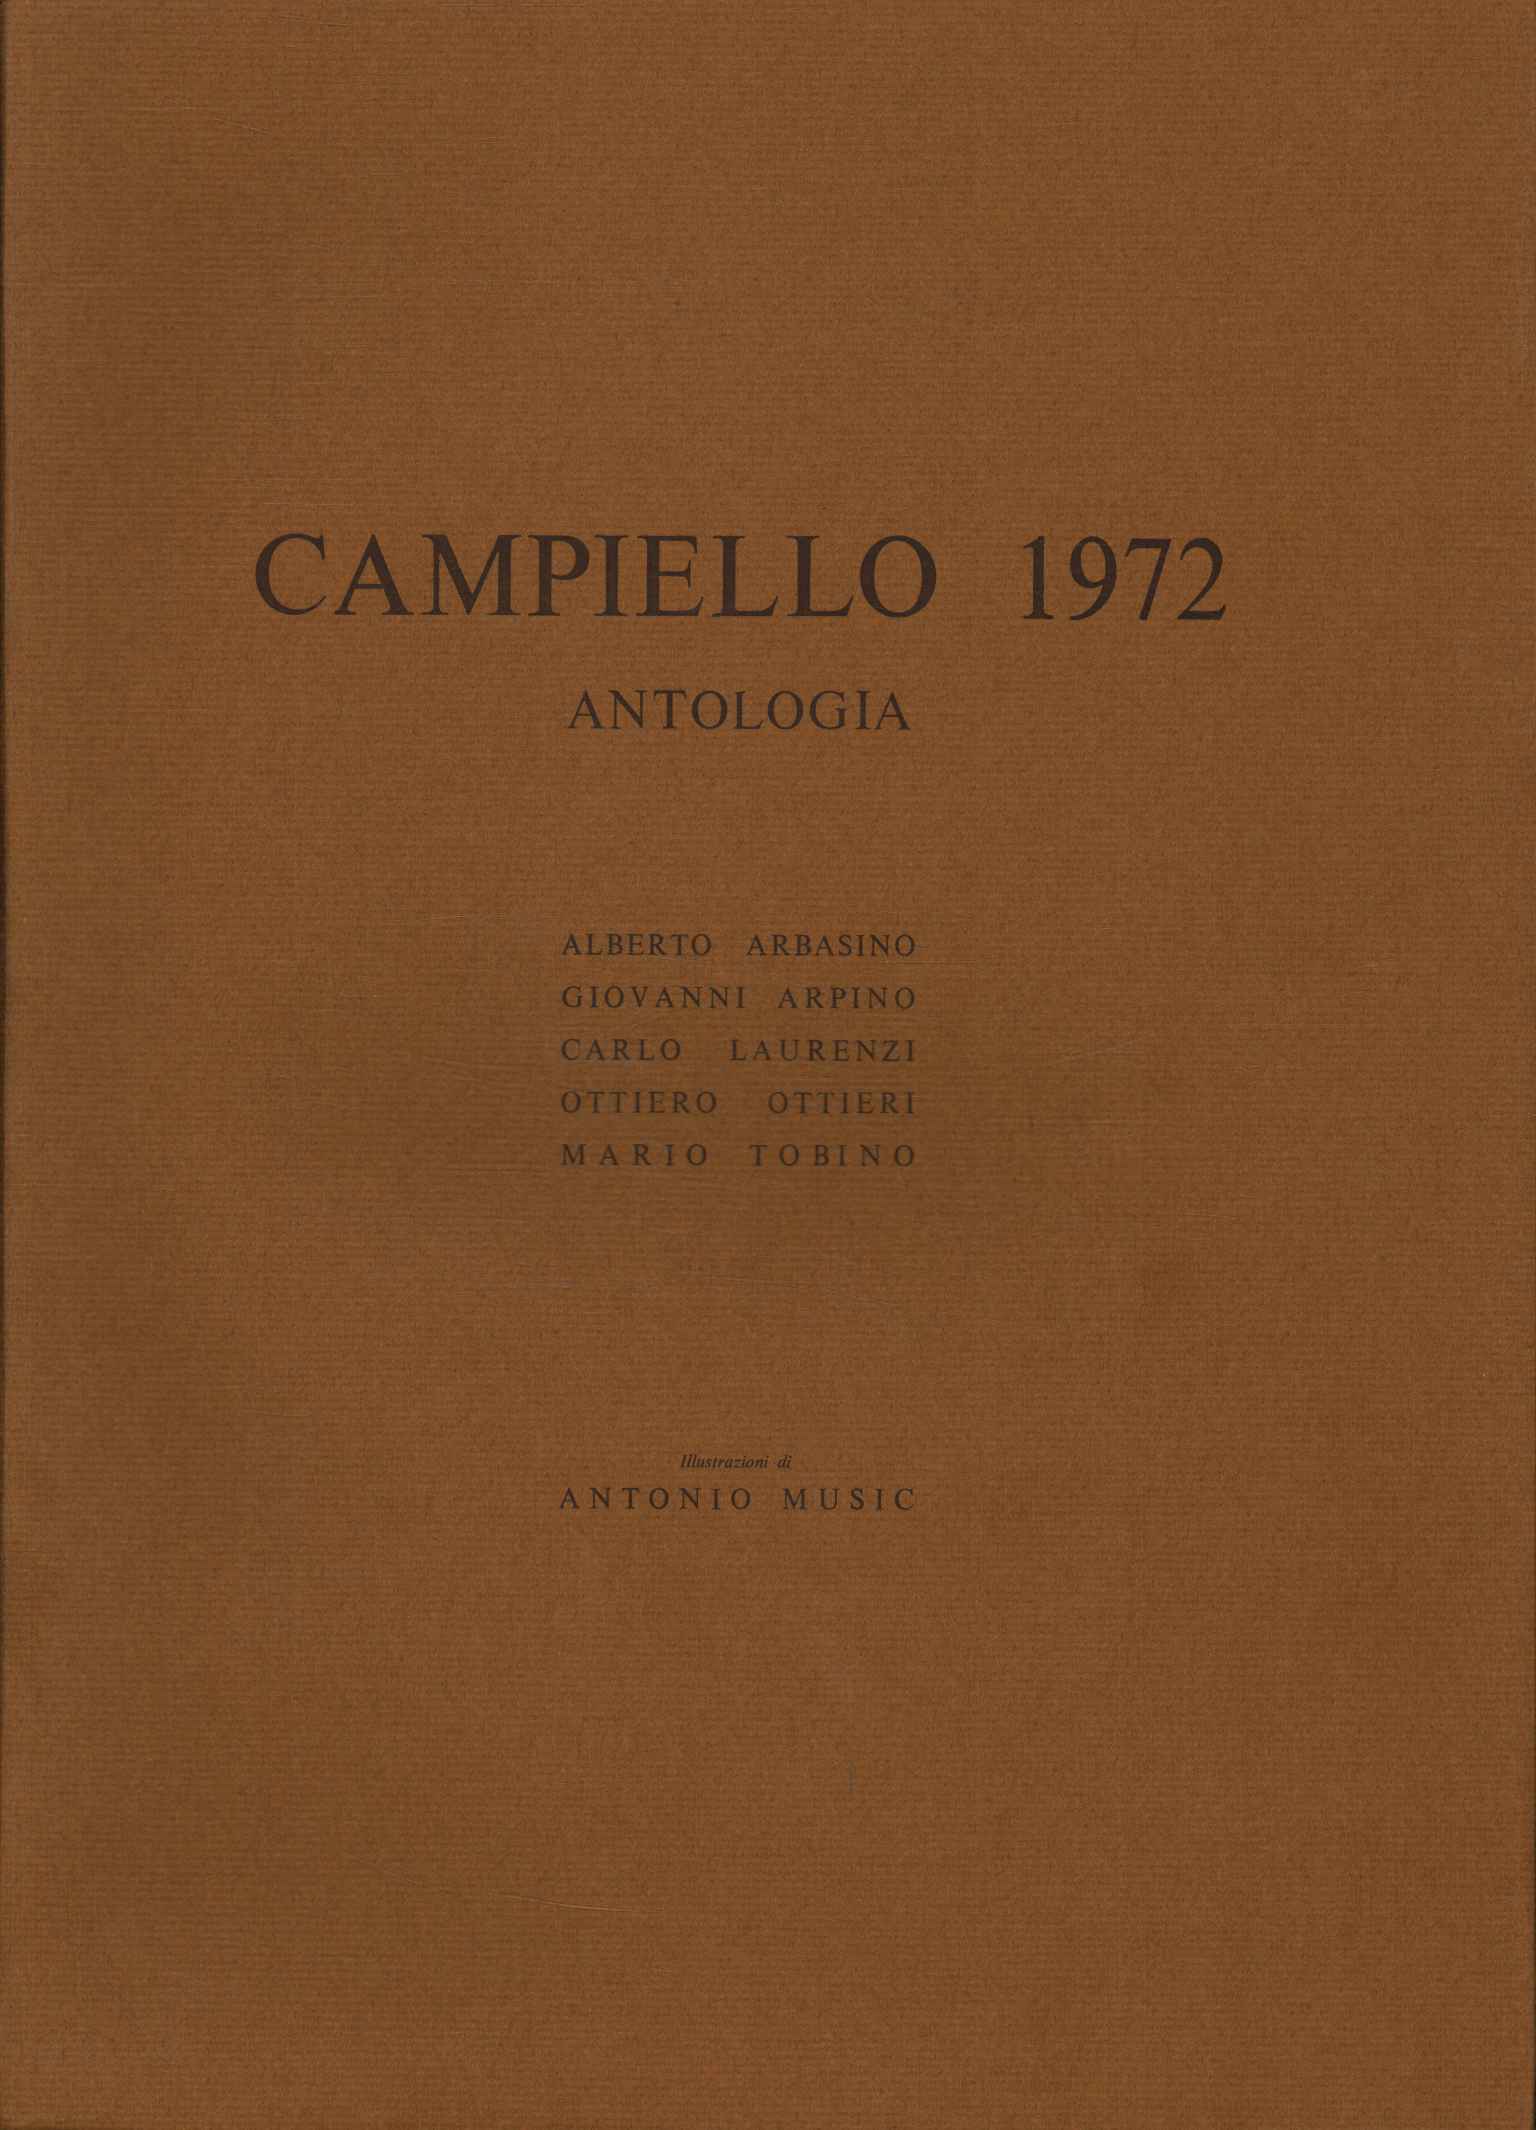 Anthology by Campiello 1972